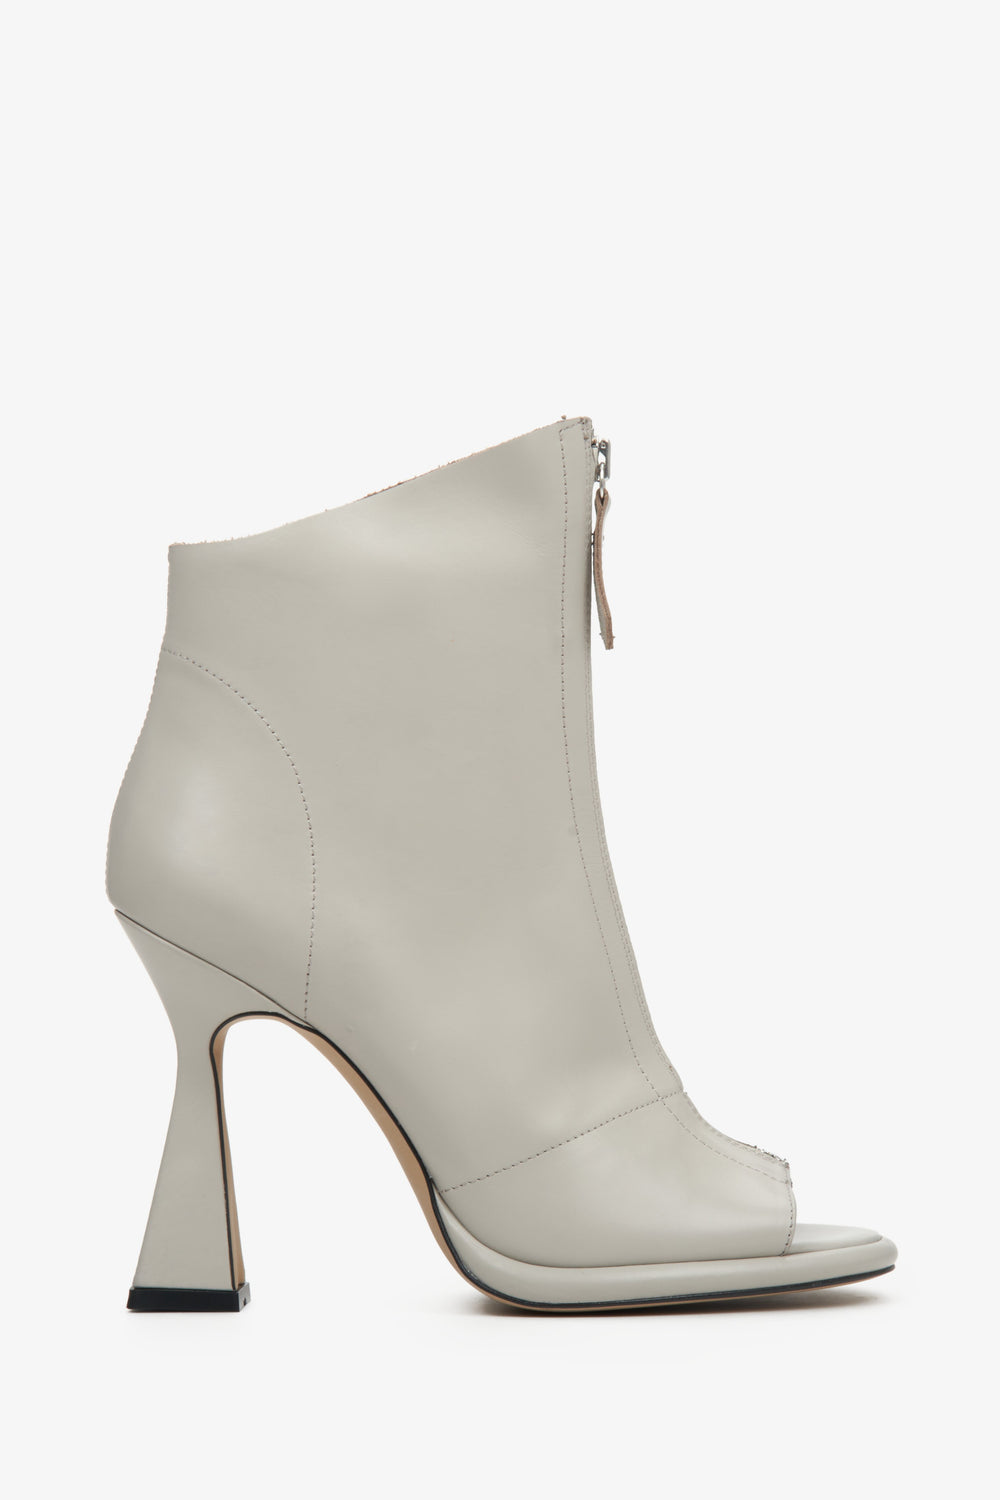 Grey Open Toe Ankle Boots with a Funnel Heel Estro ER00112868